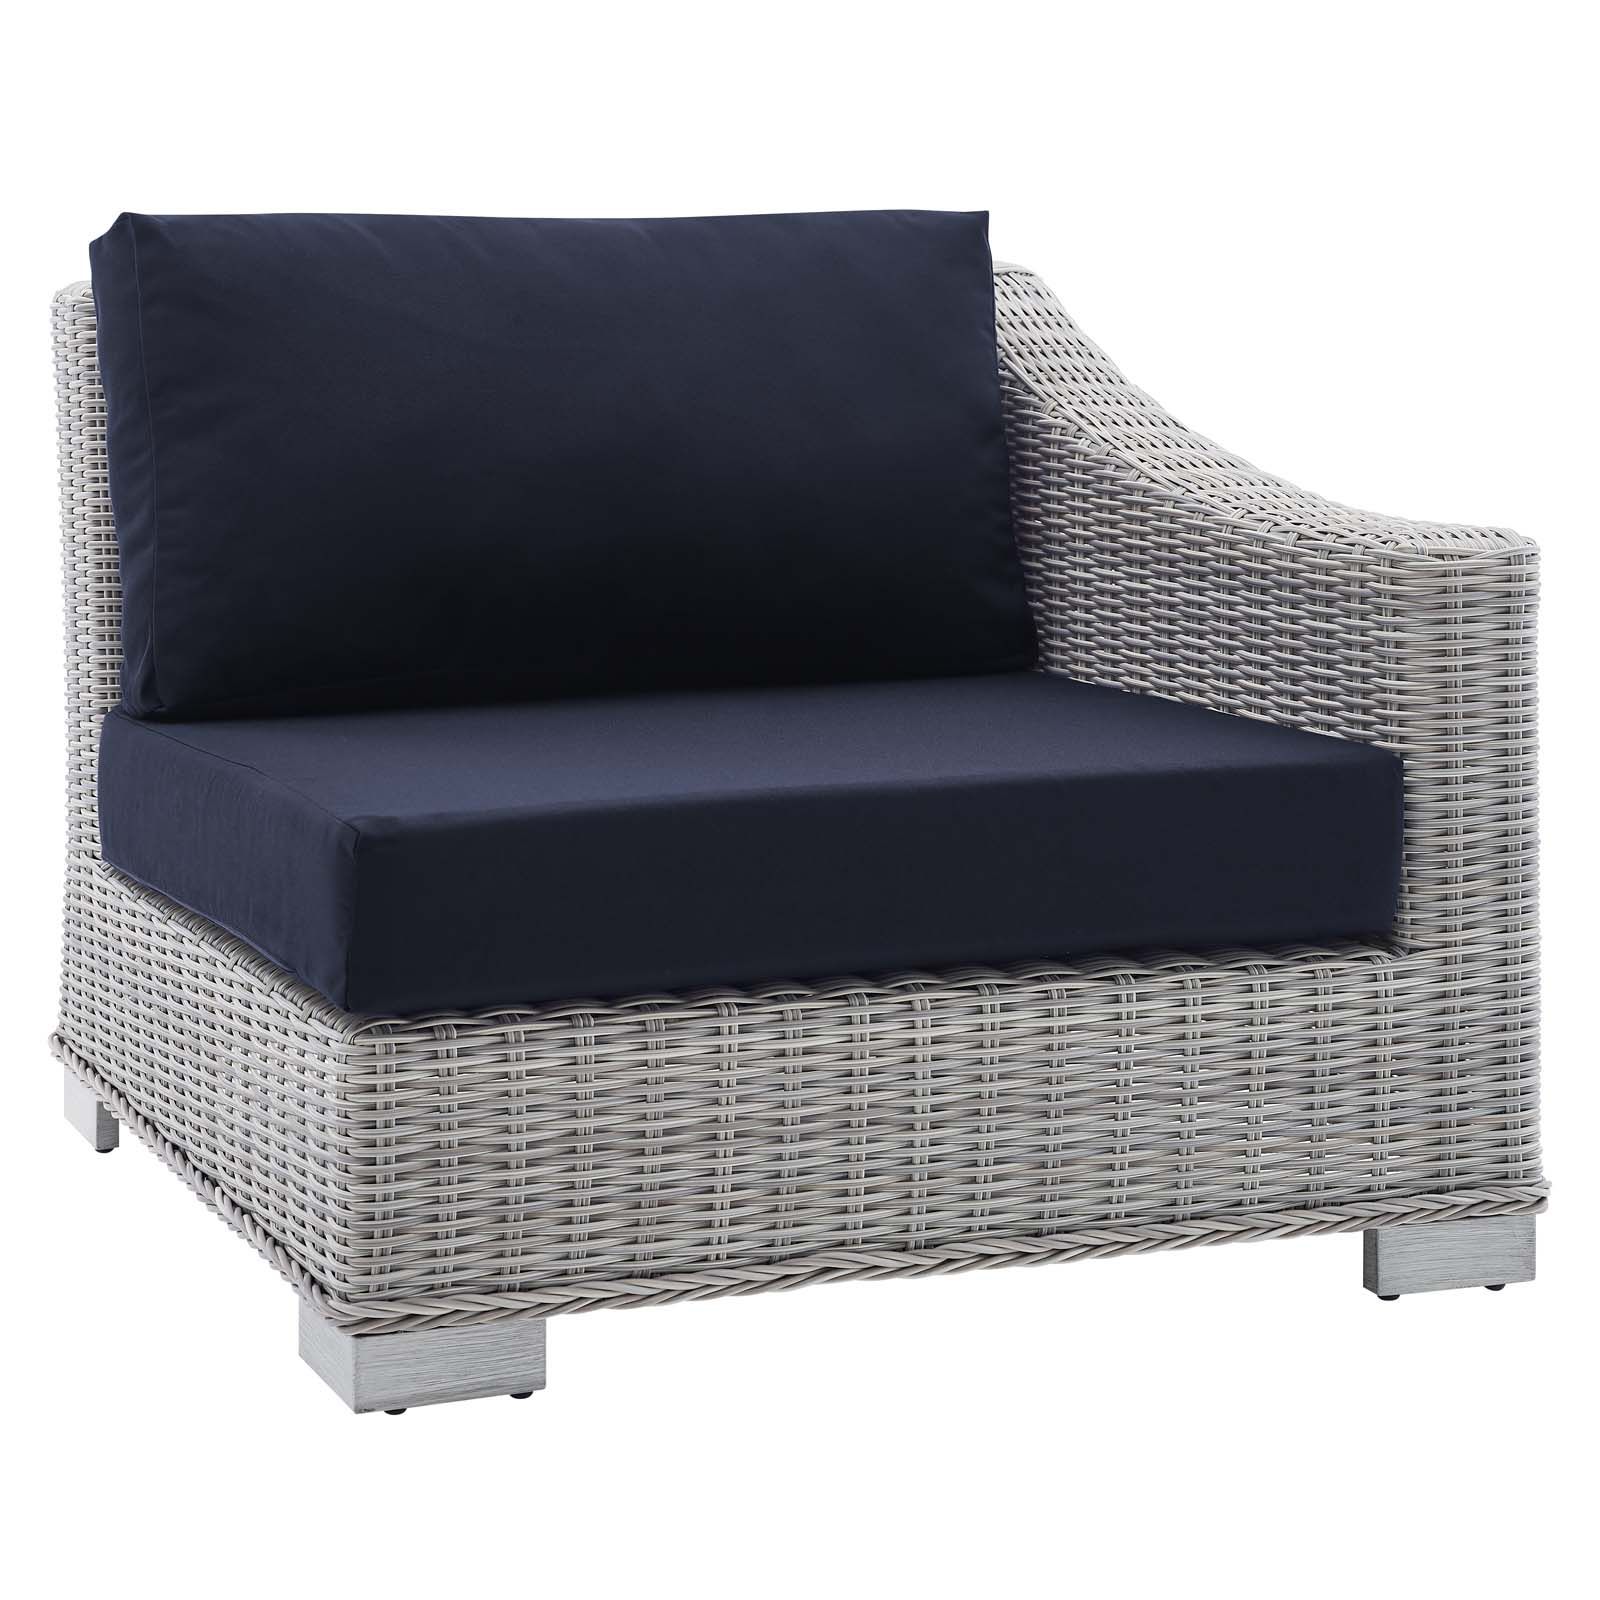 Conway Outdoor Patio Wicker Rattan Right Arm Chair Light Gray Navy Inside Fabric Outdoor Wicker Armchairs (View 1 of 15)